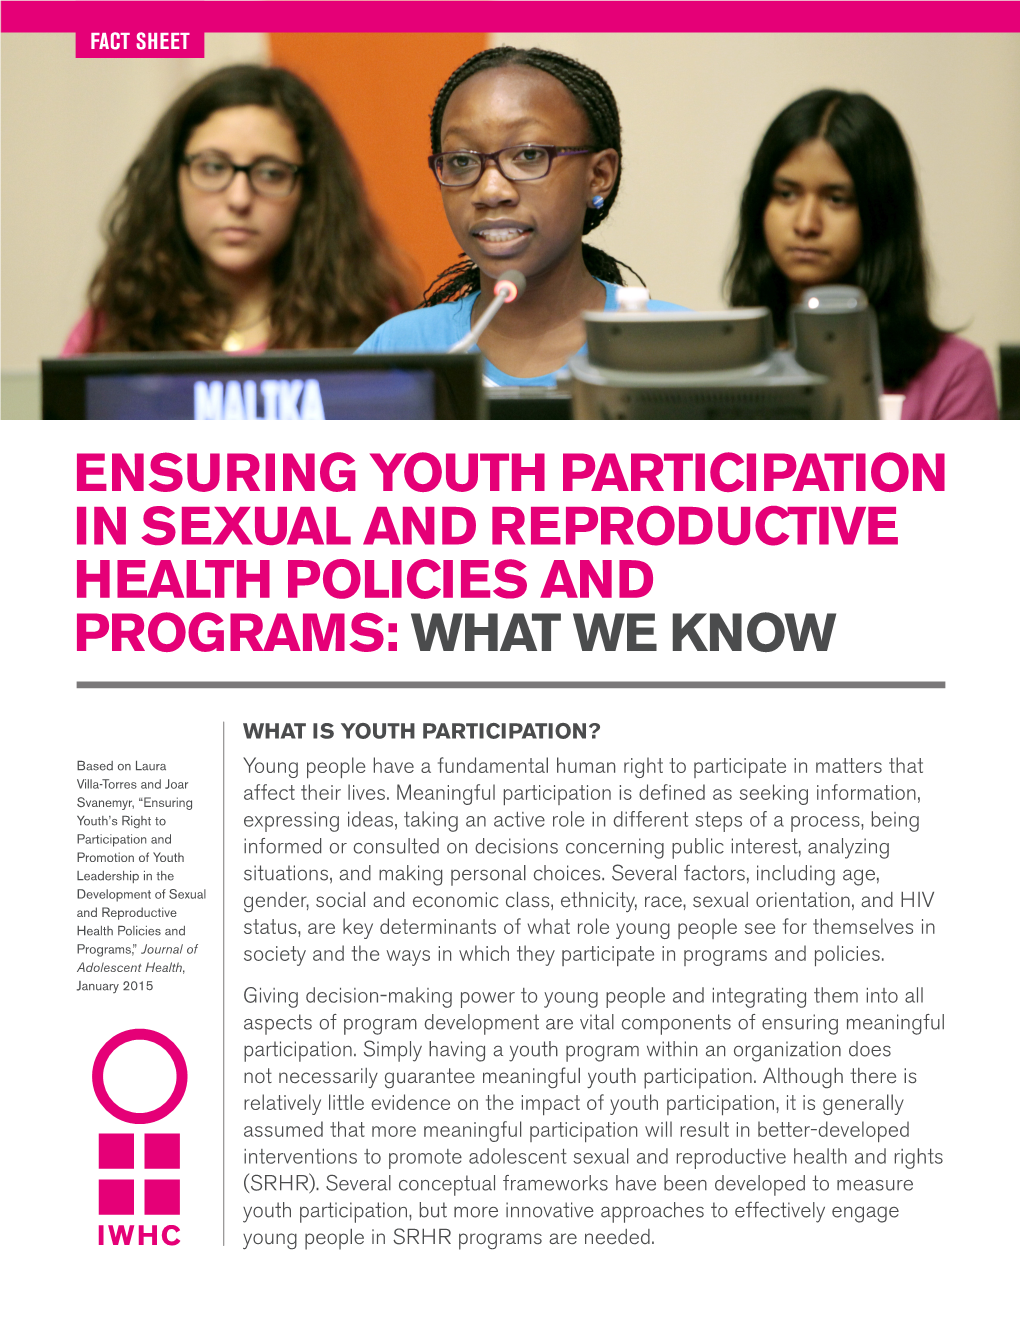 Ensuring Youth Participation in Sexual and Reproductive Health Policies and Programs: What We Know